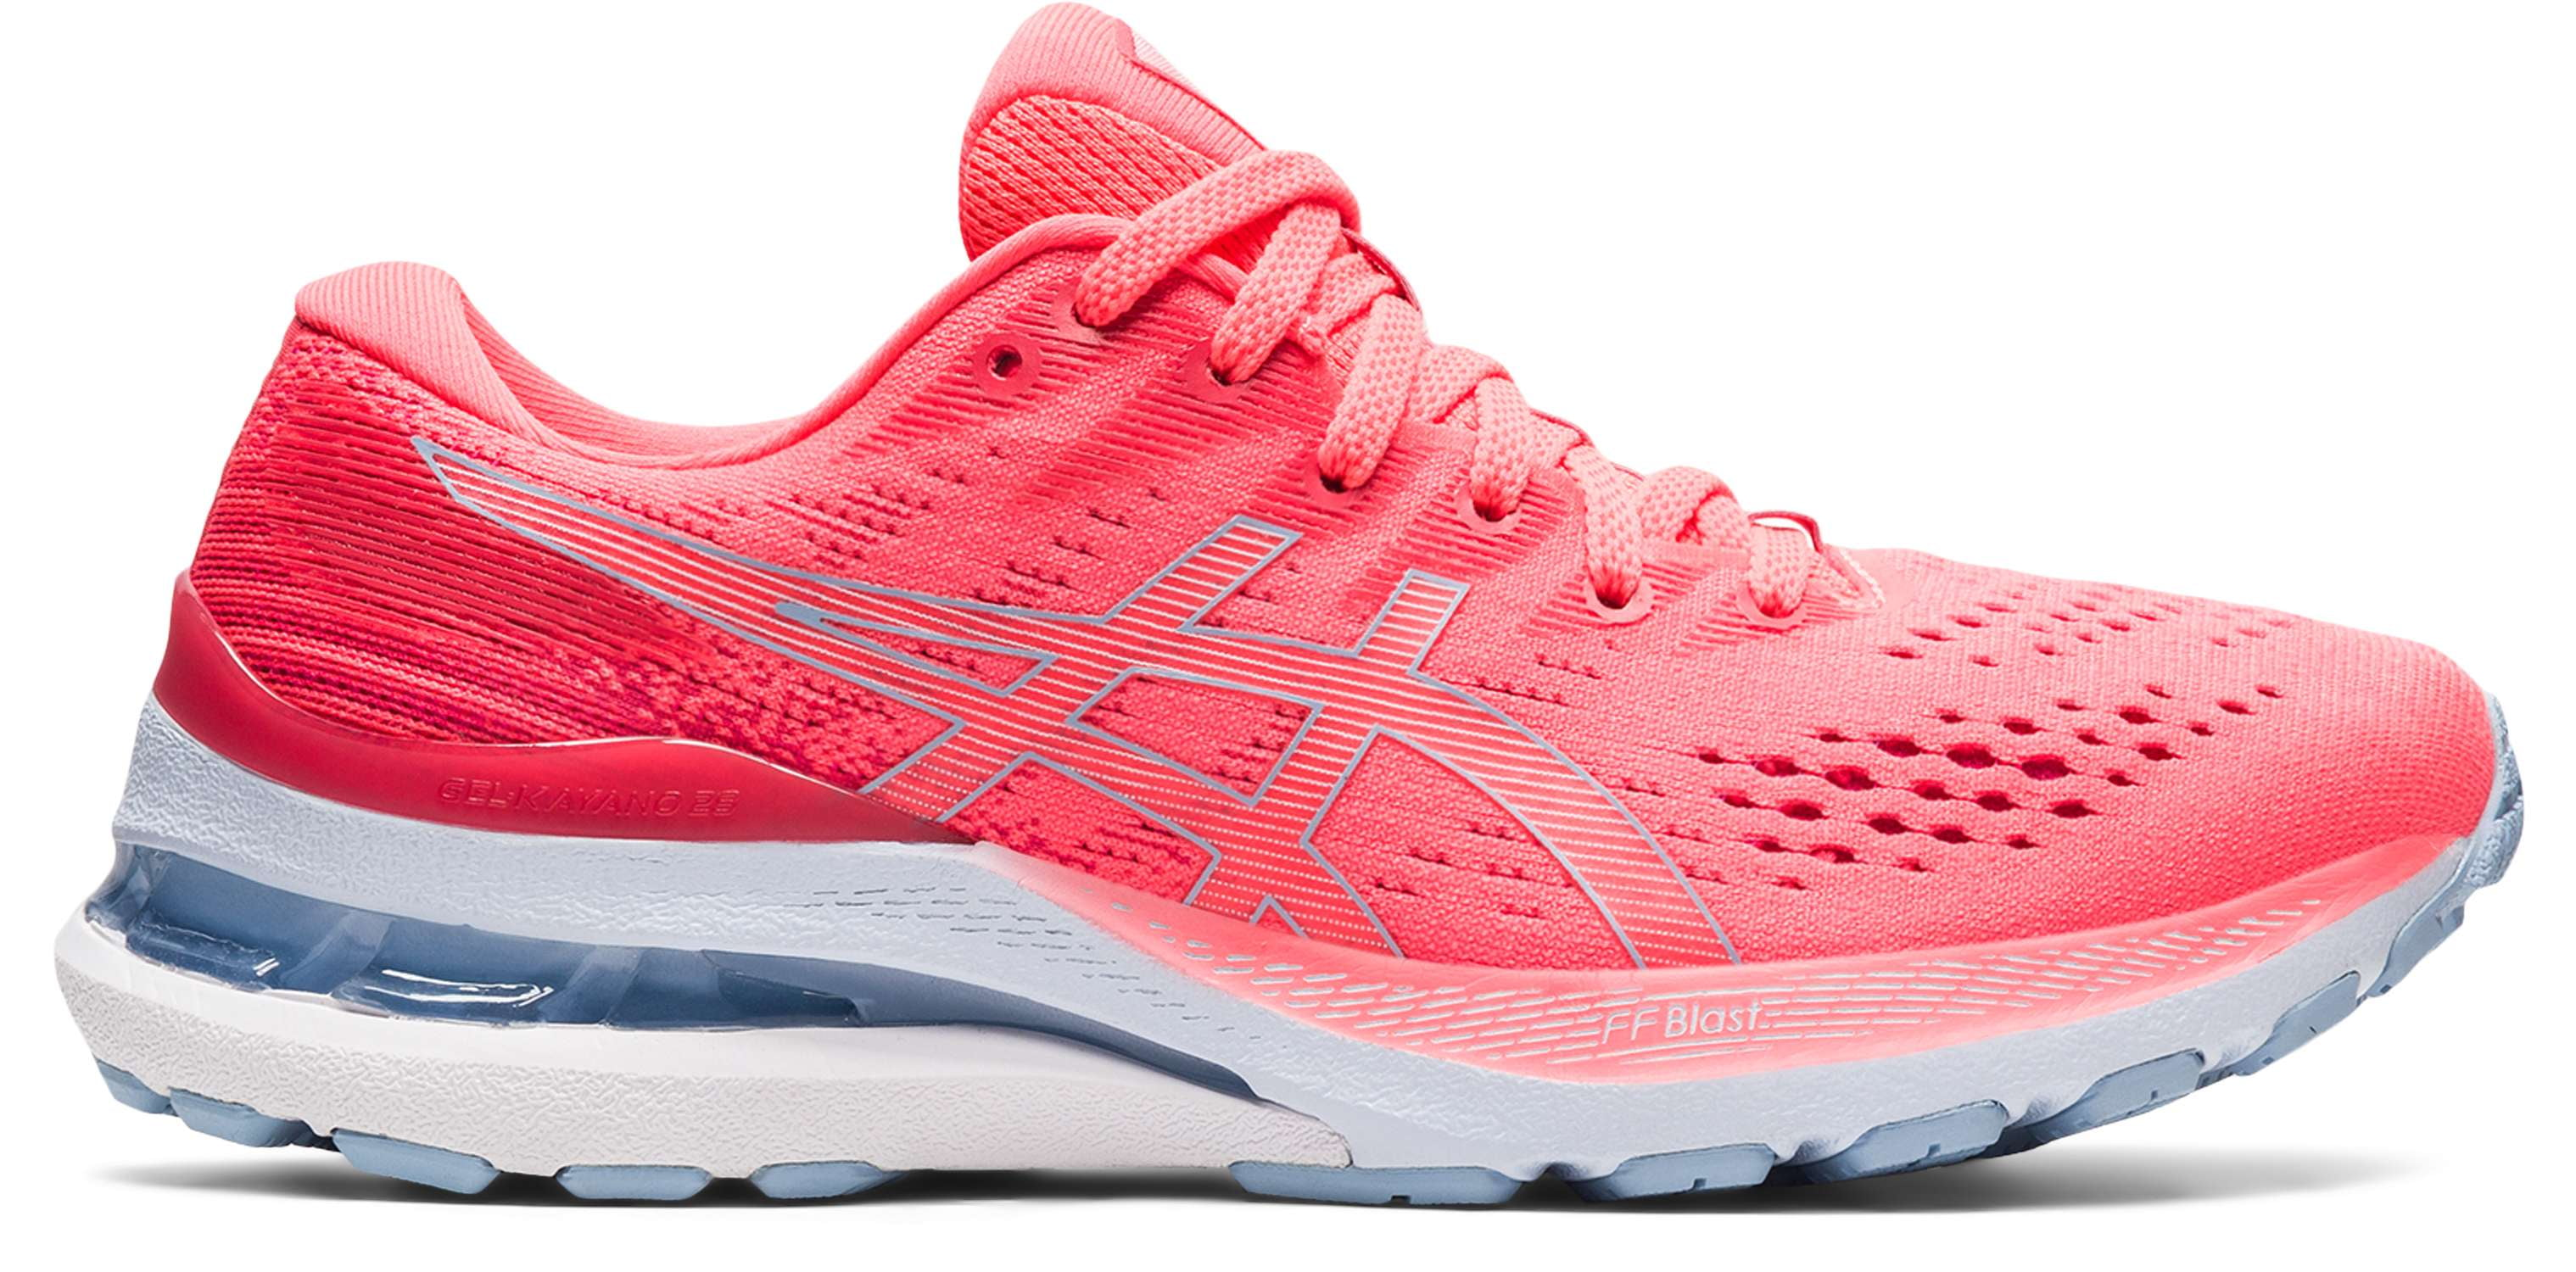 Asics Women's Gel-Kayano 28 Running Shoes in Blazing Coral /Mist - Running Shoes - Asics - ATR Sports